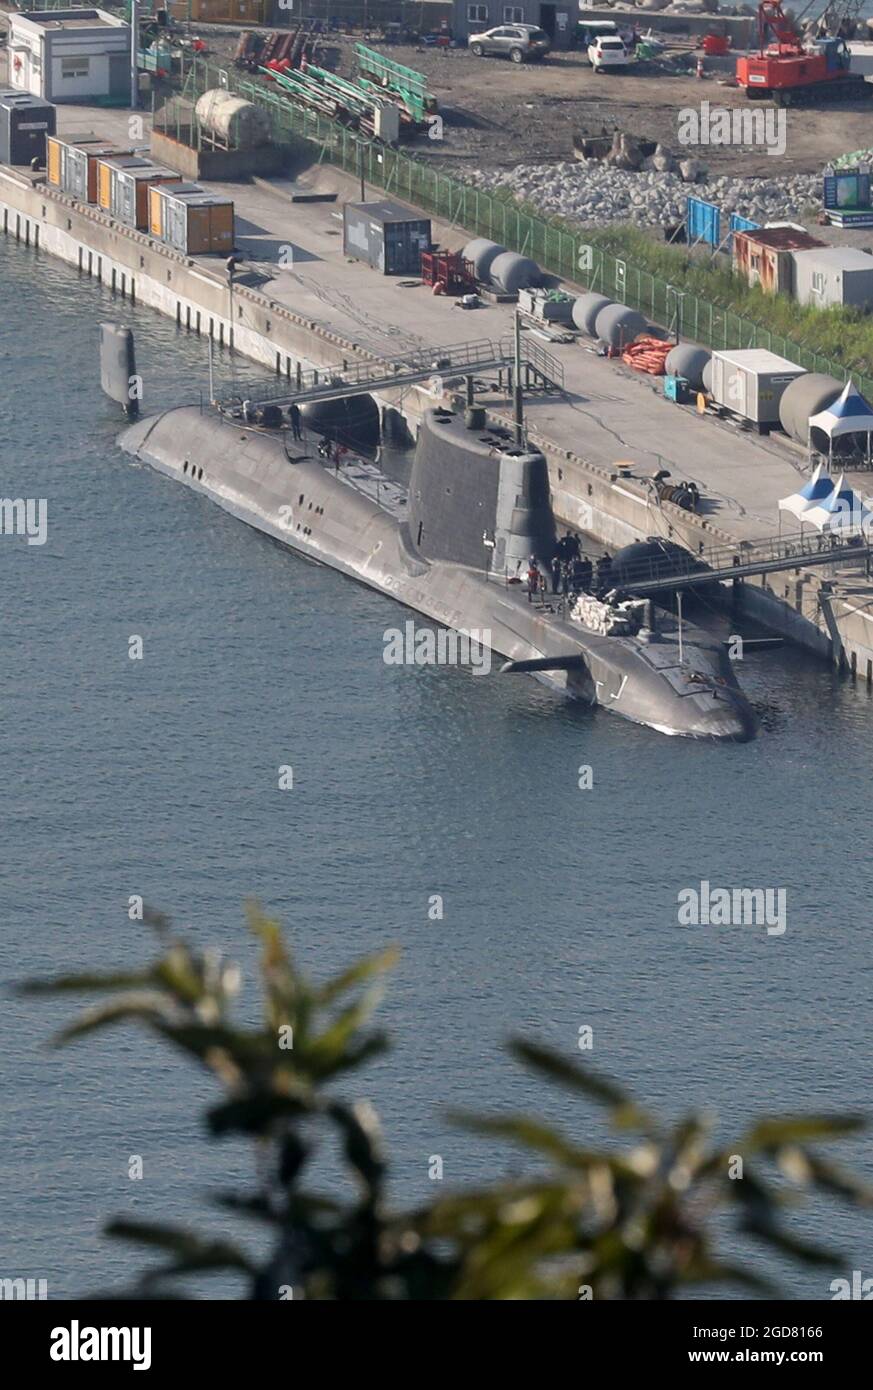 12th Aug, 2021. British nuclear sub in S. Korea The HMS Artful, a  nuclear-powered fleet submarine of the British Royal Navy's HMS Queen  Elizabeth aircraft carrier, is docked at the naval base